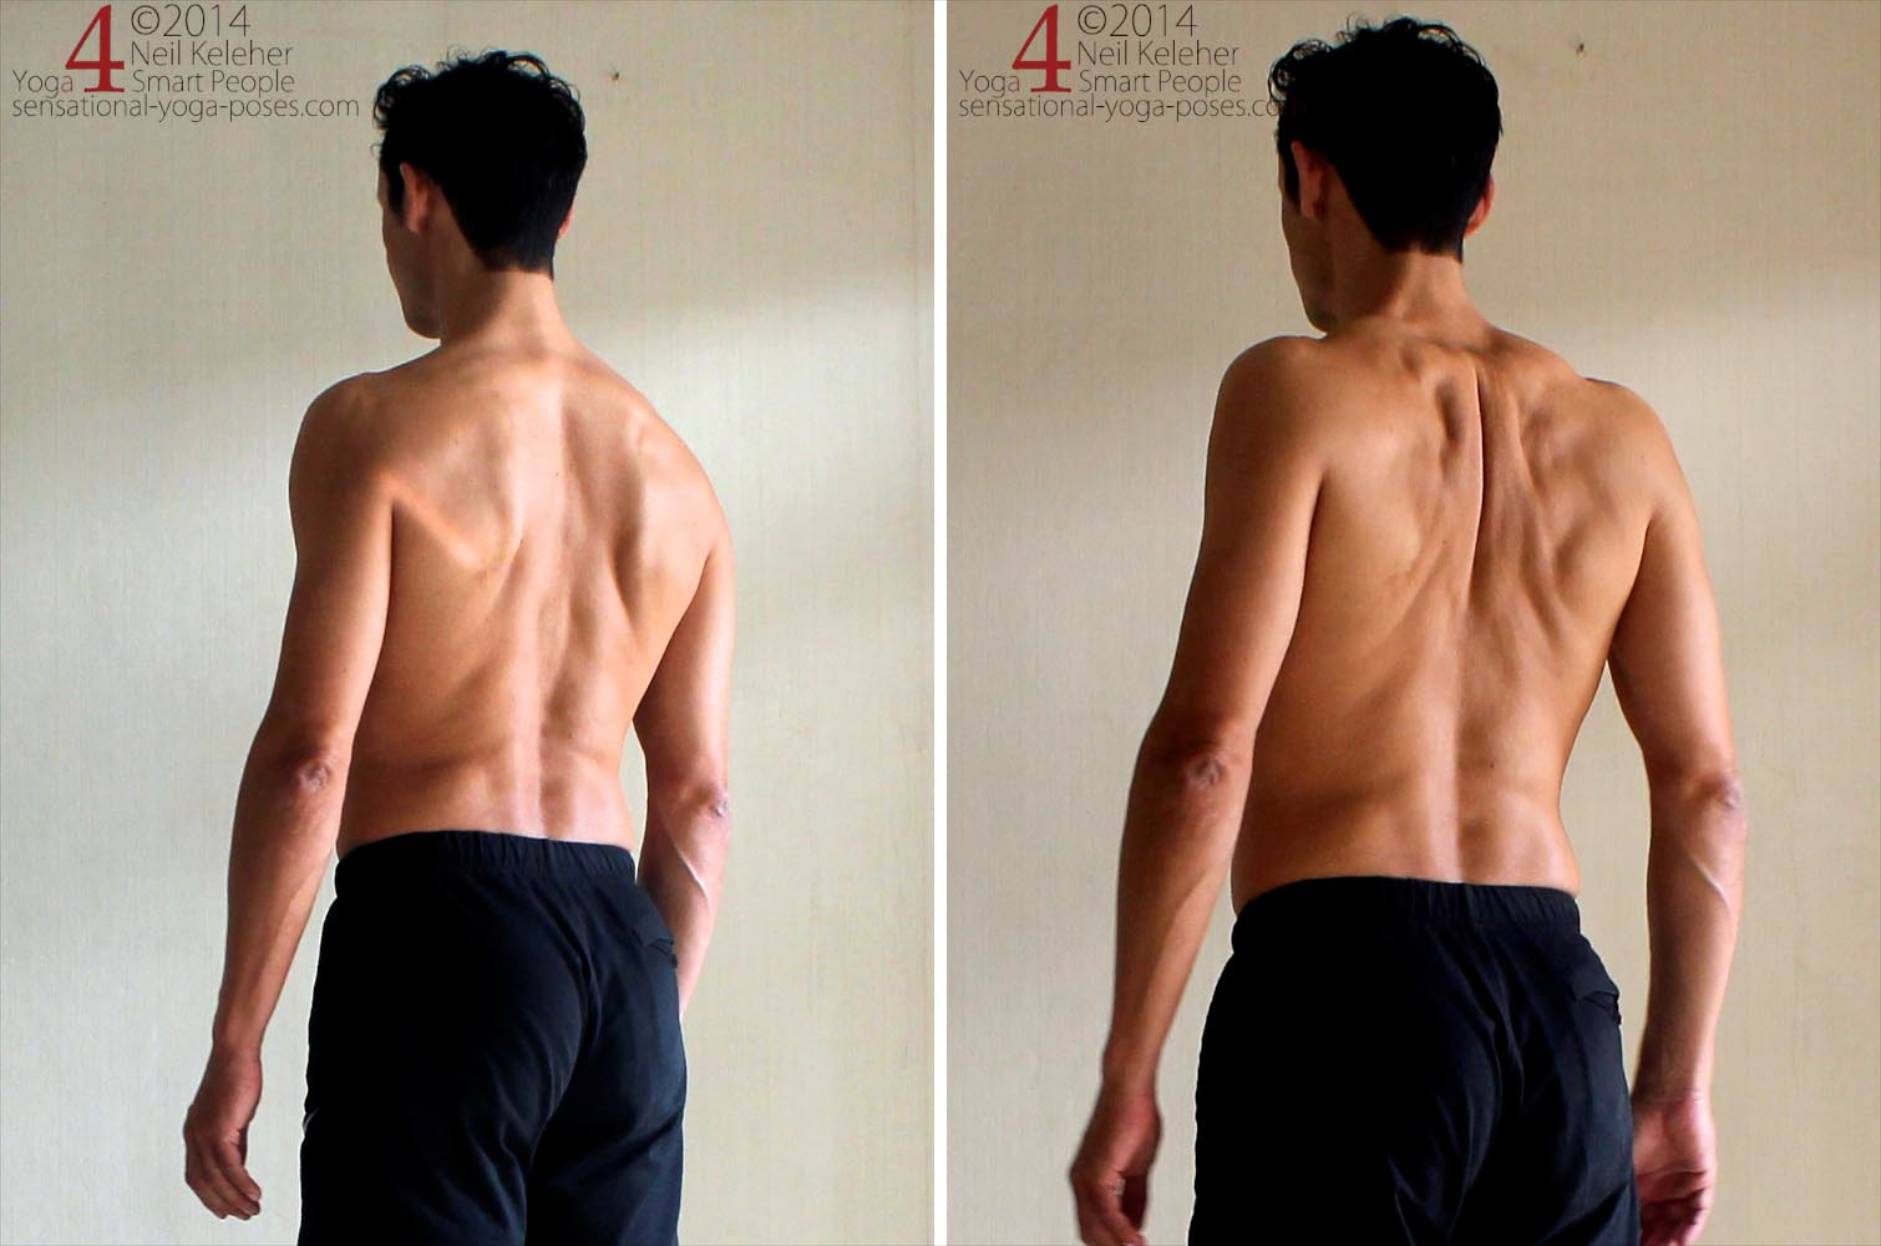 Retraction using Rhomboids: Starting with shoulders relaxed, move shoulder blades inwards and slightly upwards so that the rhomboids are activated. Relax and repeat.